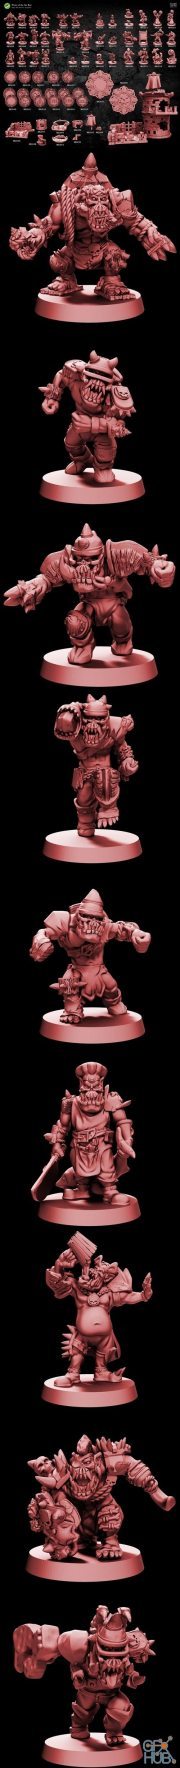 Pirate of the orc bay – 3D Print